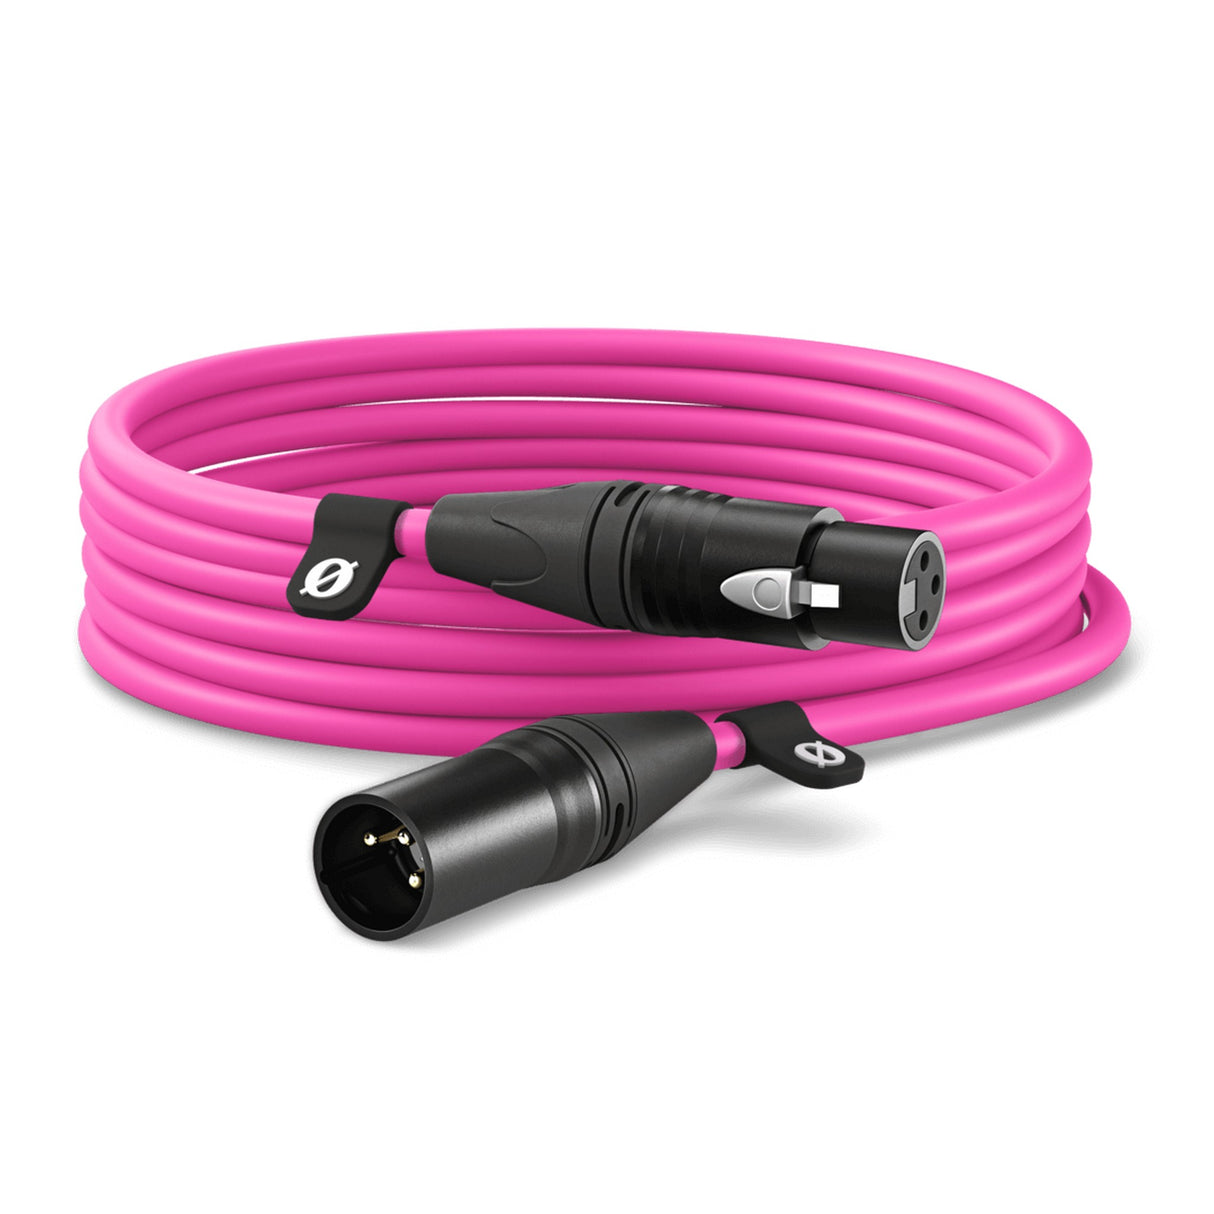 RODE XLR-6 6-Foot Premium Male to Female XLR Cable, Pink